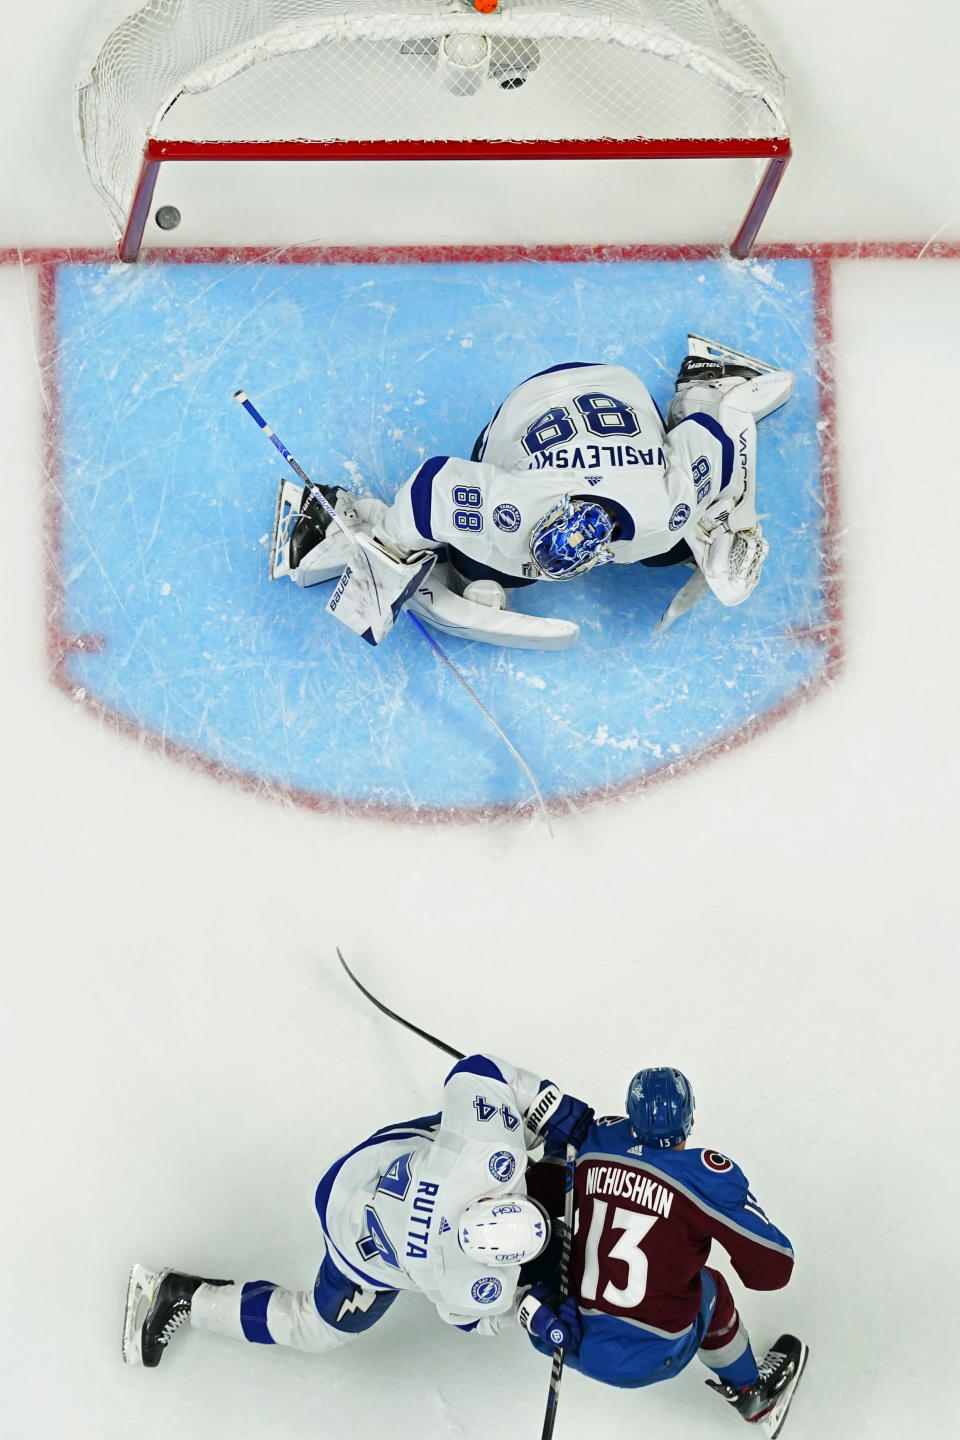 Colorado Avalanche right wing Valeri Nichushkin (13) scores on Tampa Bay Lightning goaltender Andrei Vasilevskiy (88) during the first period in Game 2 of the NHL hockey Stanley Cup Final, Saturday, June 18, 2022, in Denver. (AP Photo/John Locher)